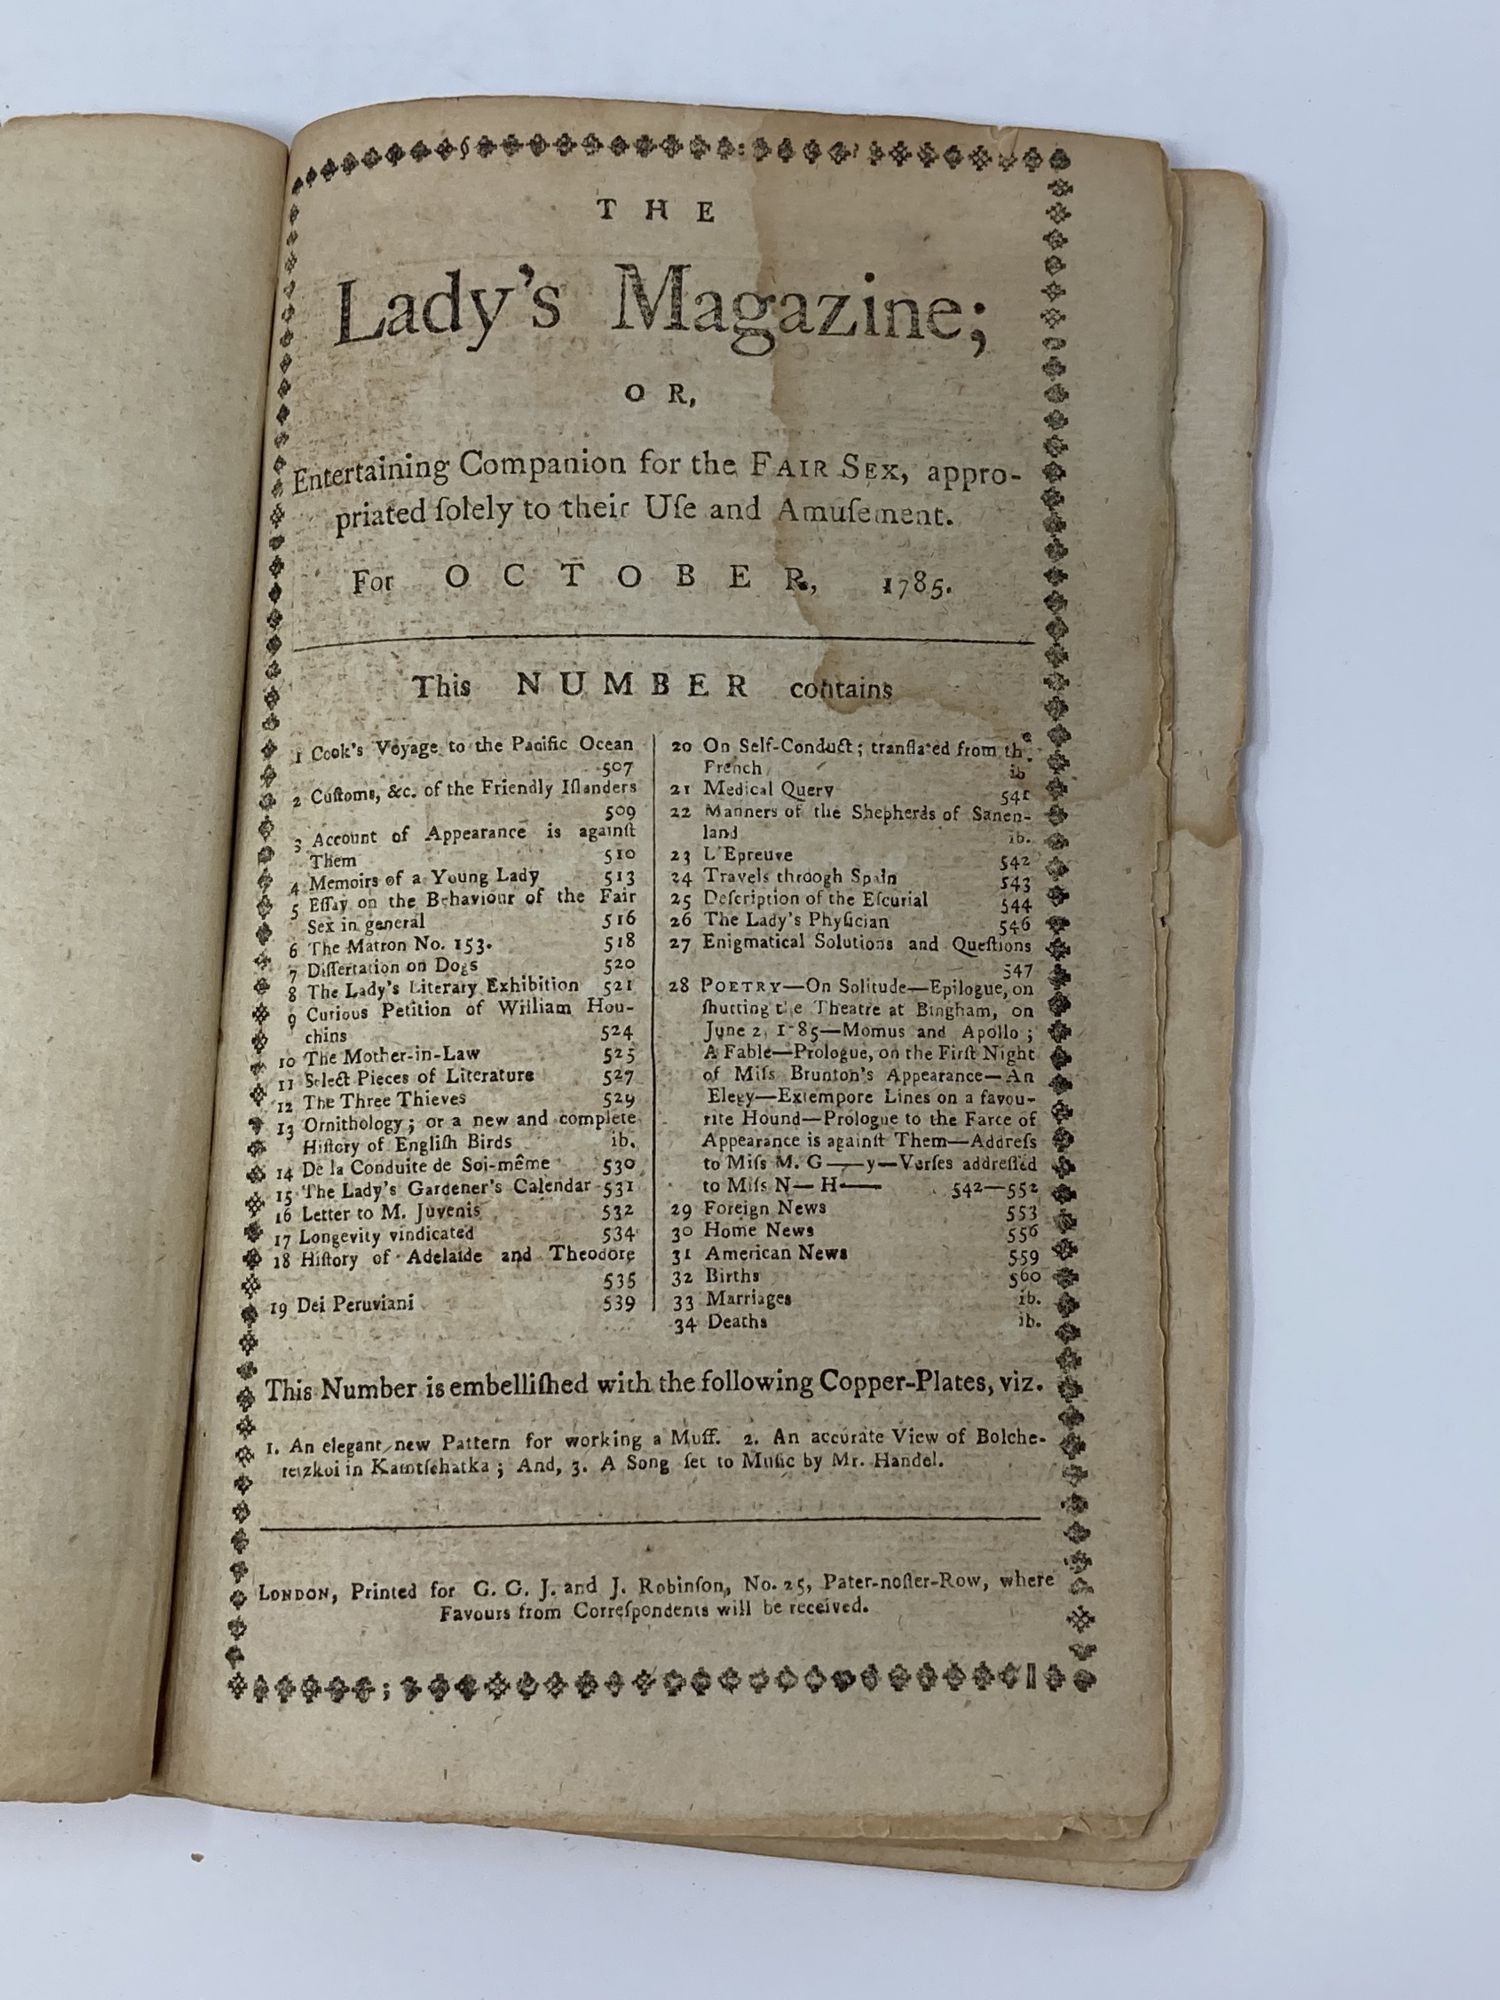 Various - The Lady's Magazine; or, Entertaining Companion for the Fair Sex, Appropriated Solely to Their Use and Amusement for October, 1785 (with References to Captain Cook's Voyage)